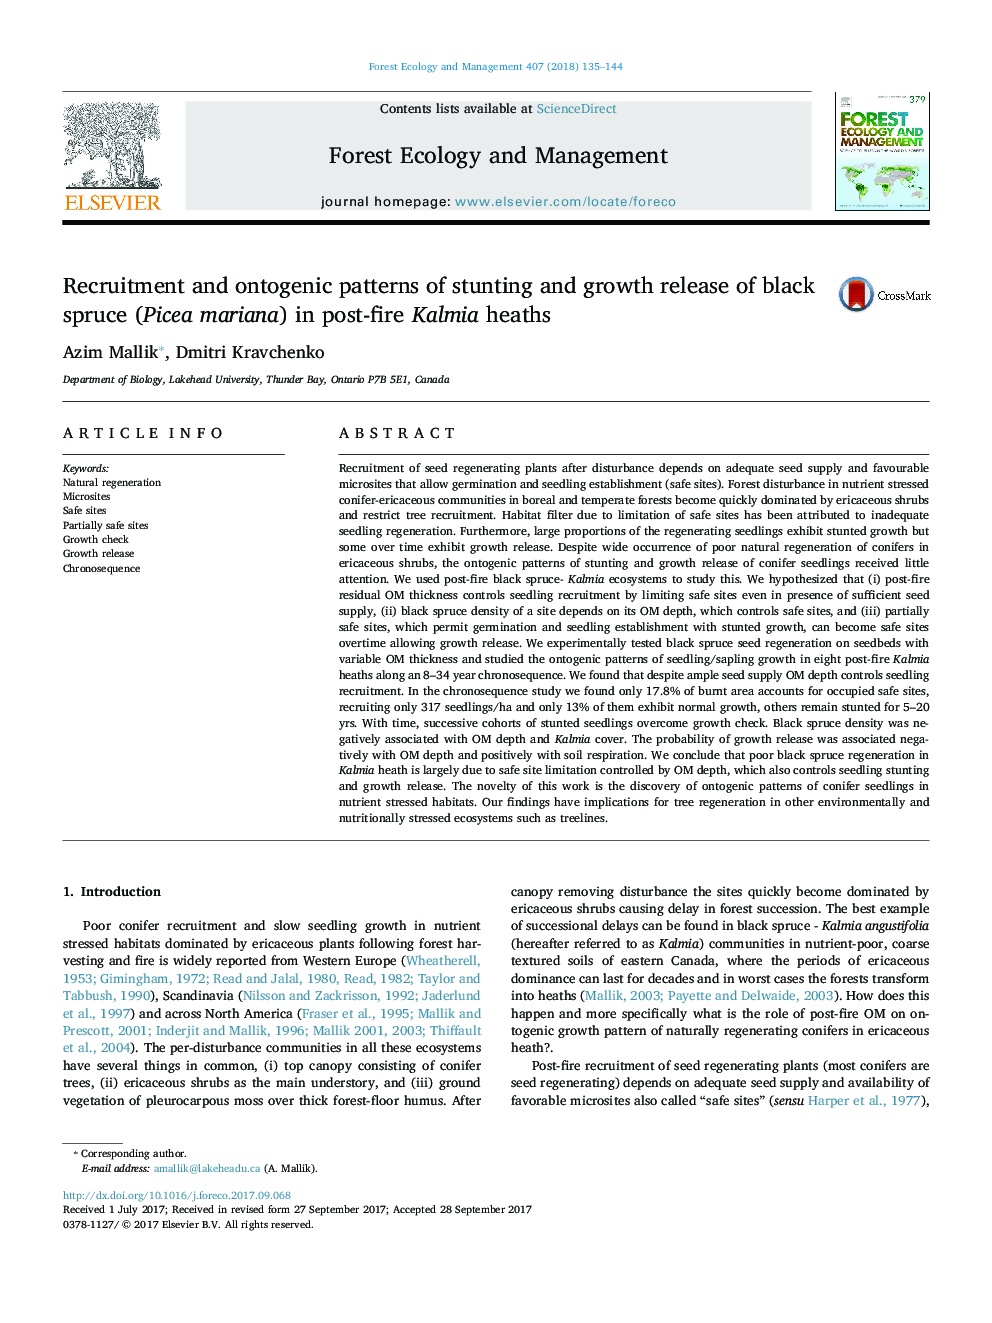 Recruitment and ontogenic patterns of stunting and growth release of black spruce (Picea mariana) in post-fire Kalmia heaths